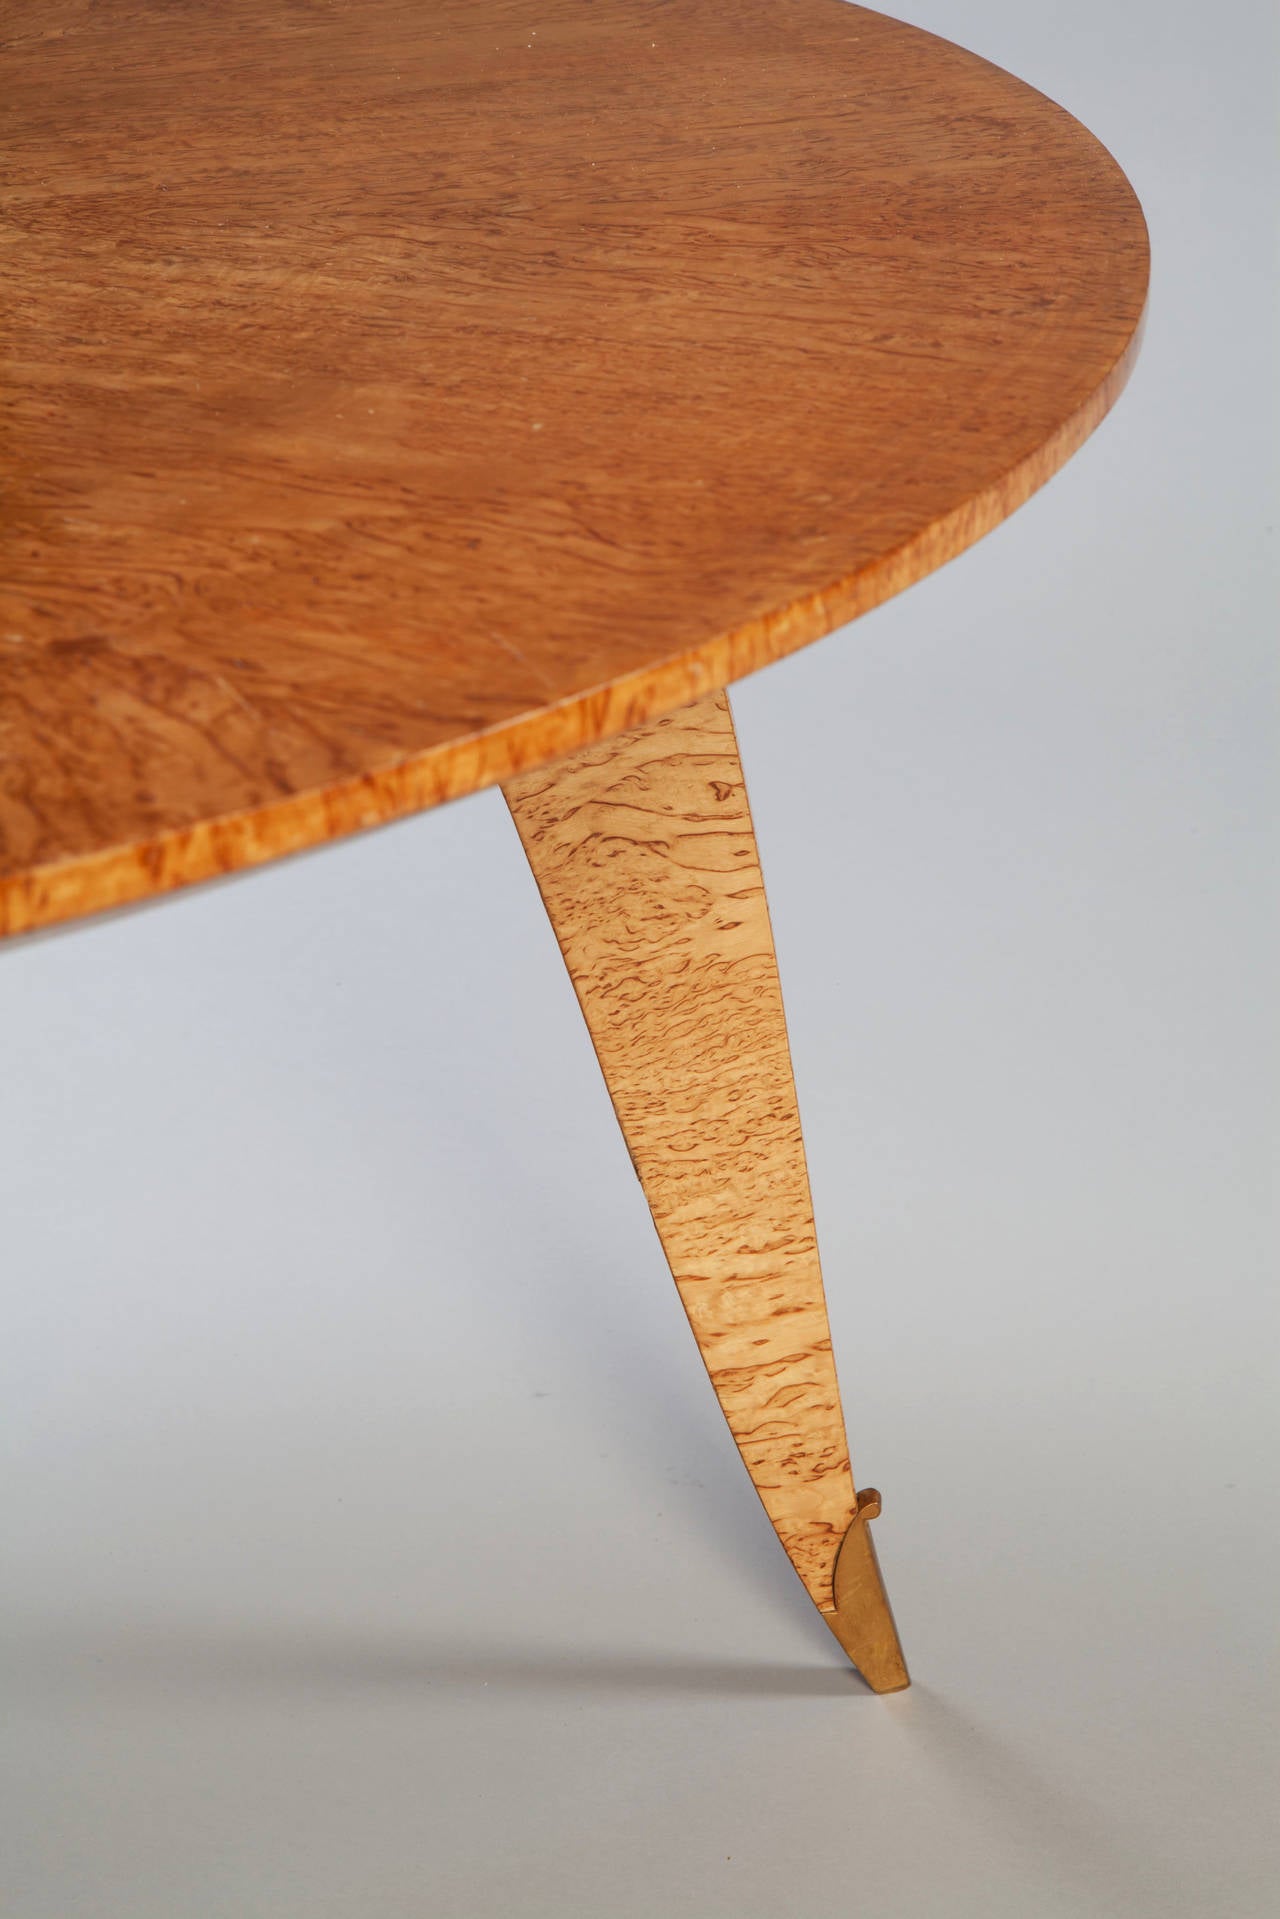 French Fine Bird's-Eye Maple Wood Coffee Table of Circular Form by Jean Pascaud